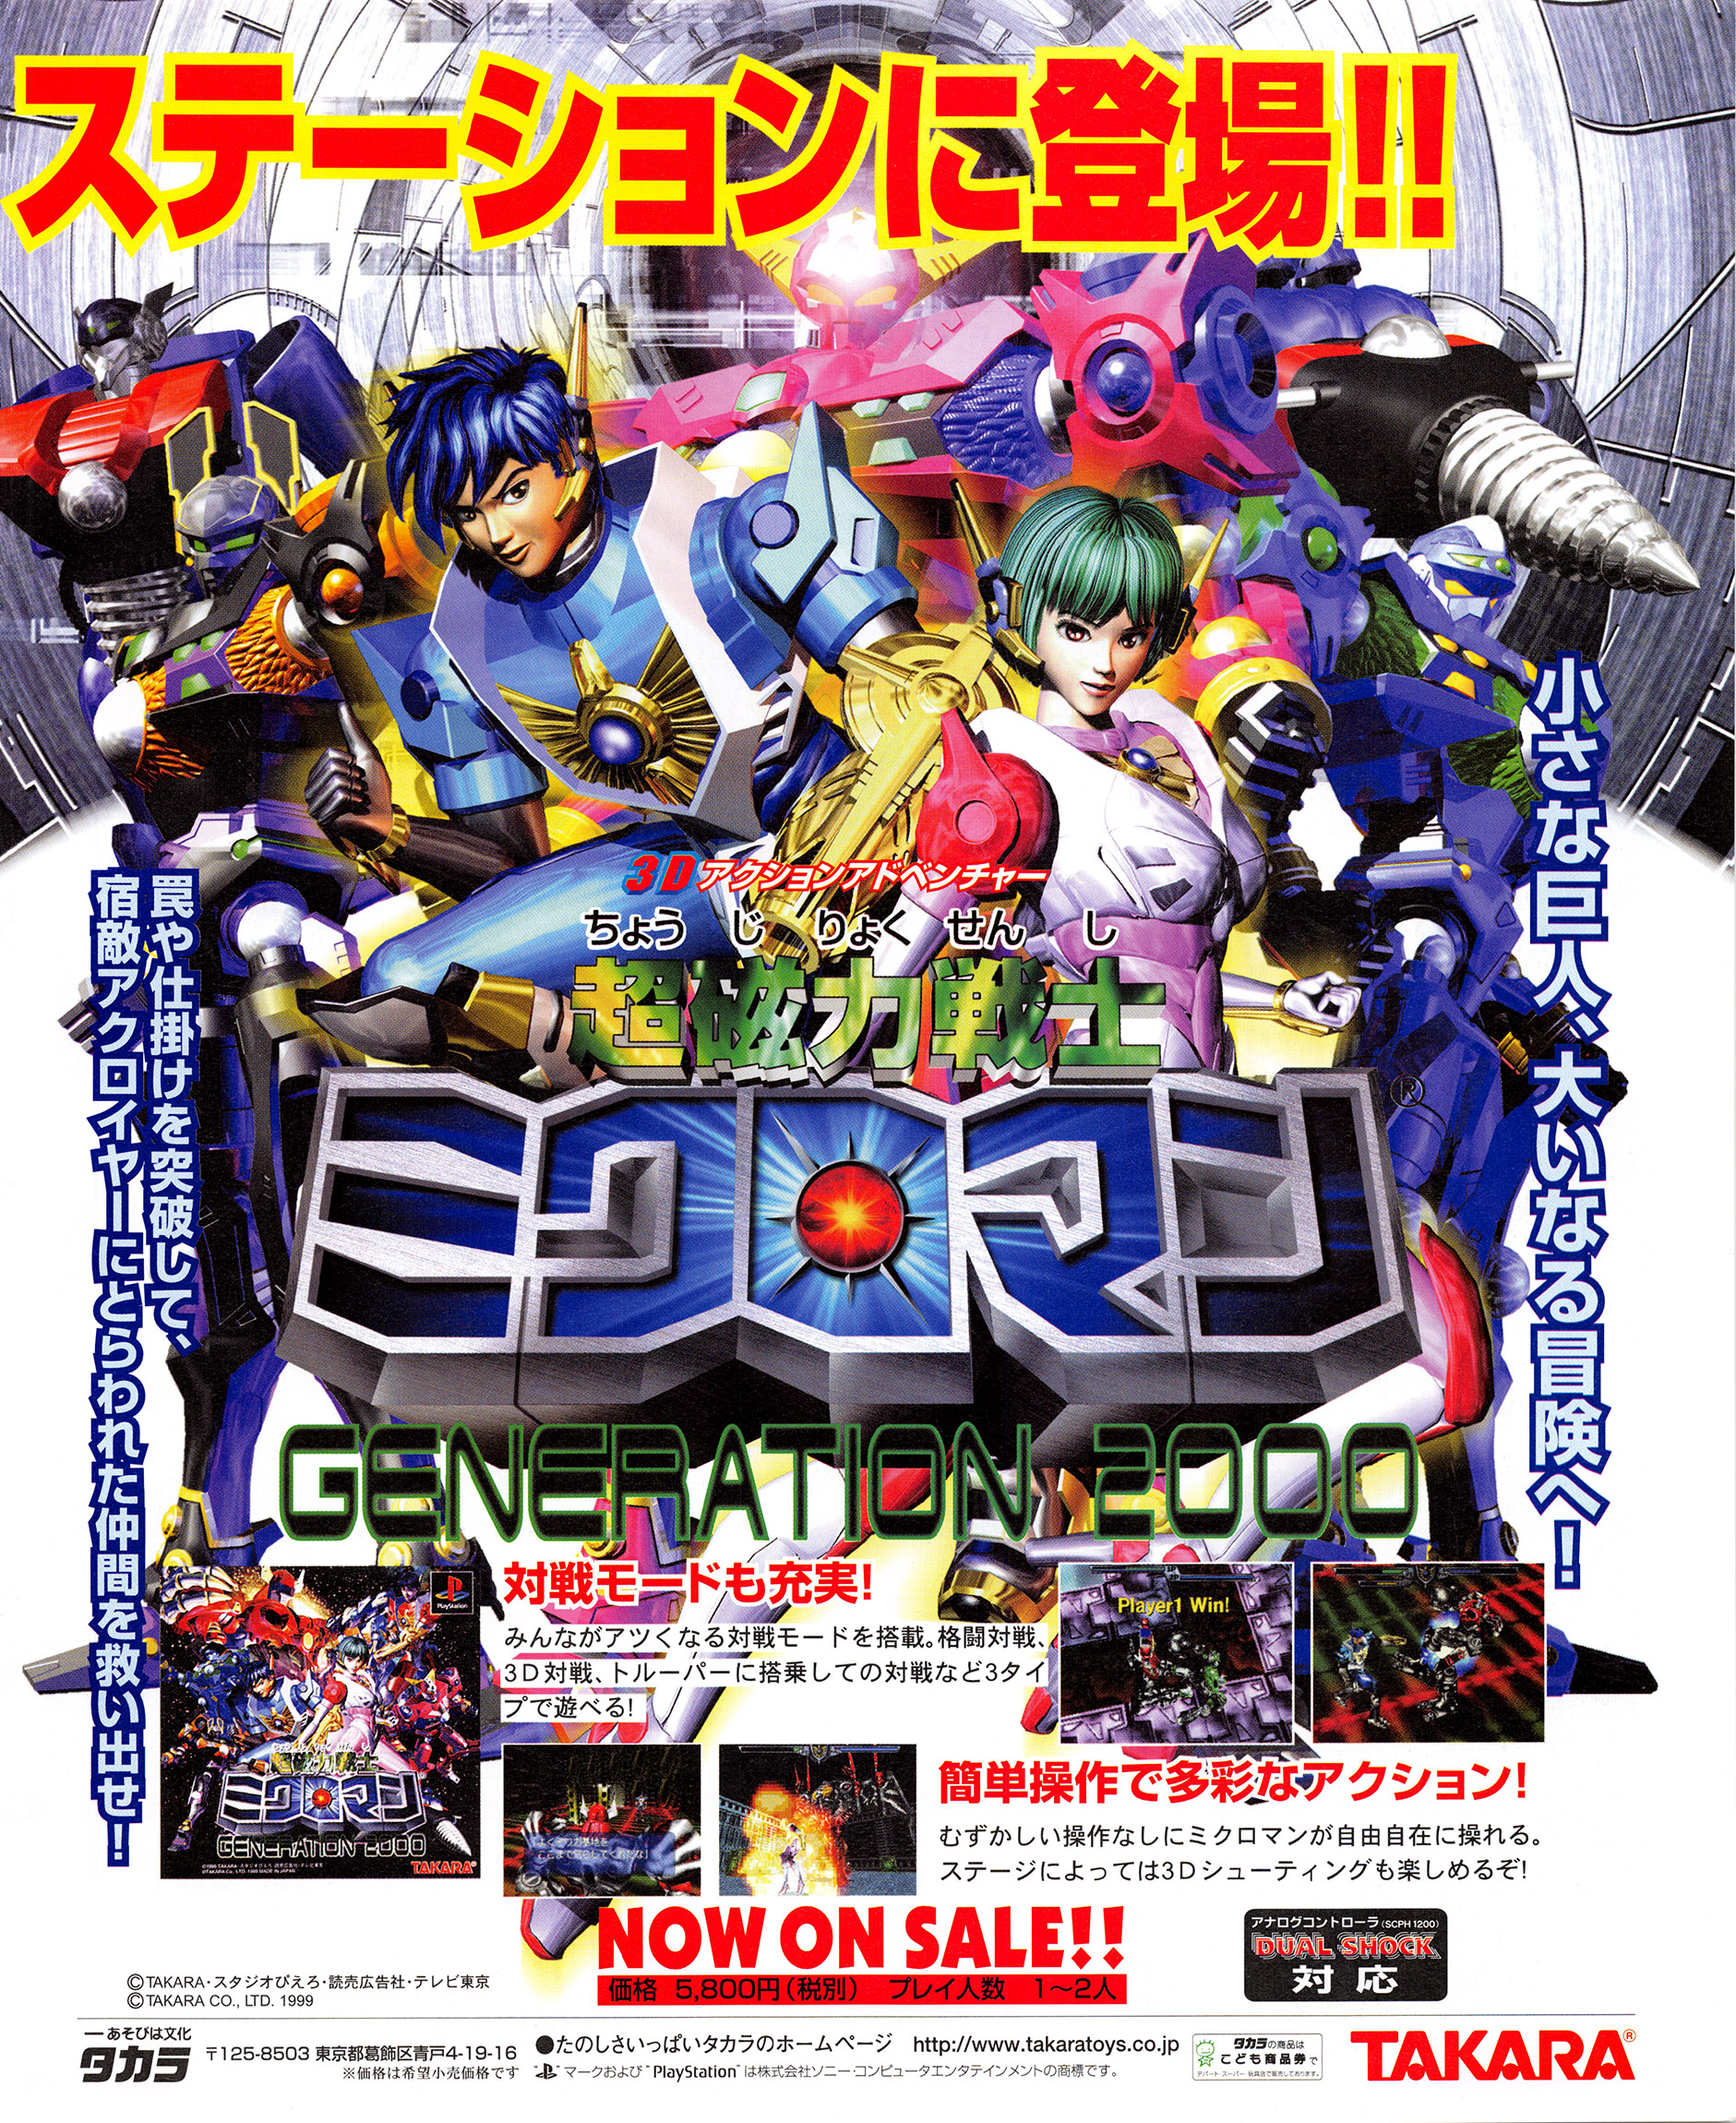 Magnetic Power Microman Generation 2000 PSX cover